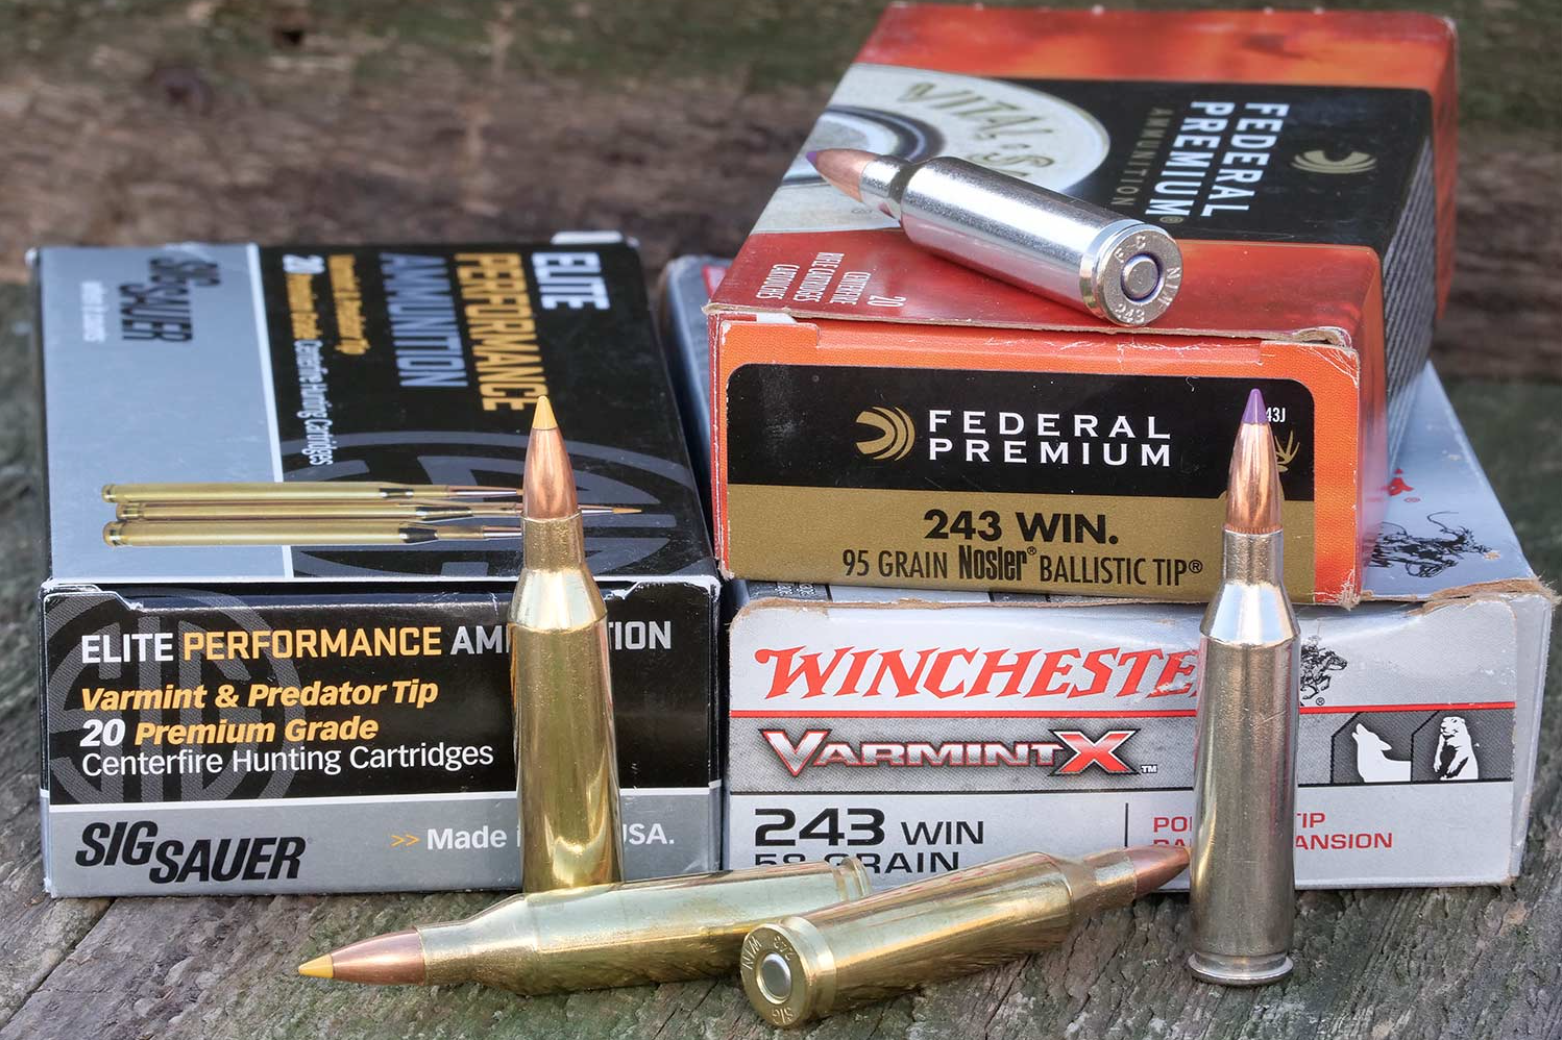 Why Did the .243 Winchester Succeed While the .244 Remington Failed?